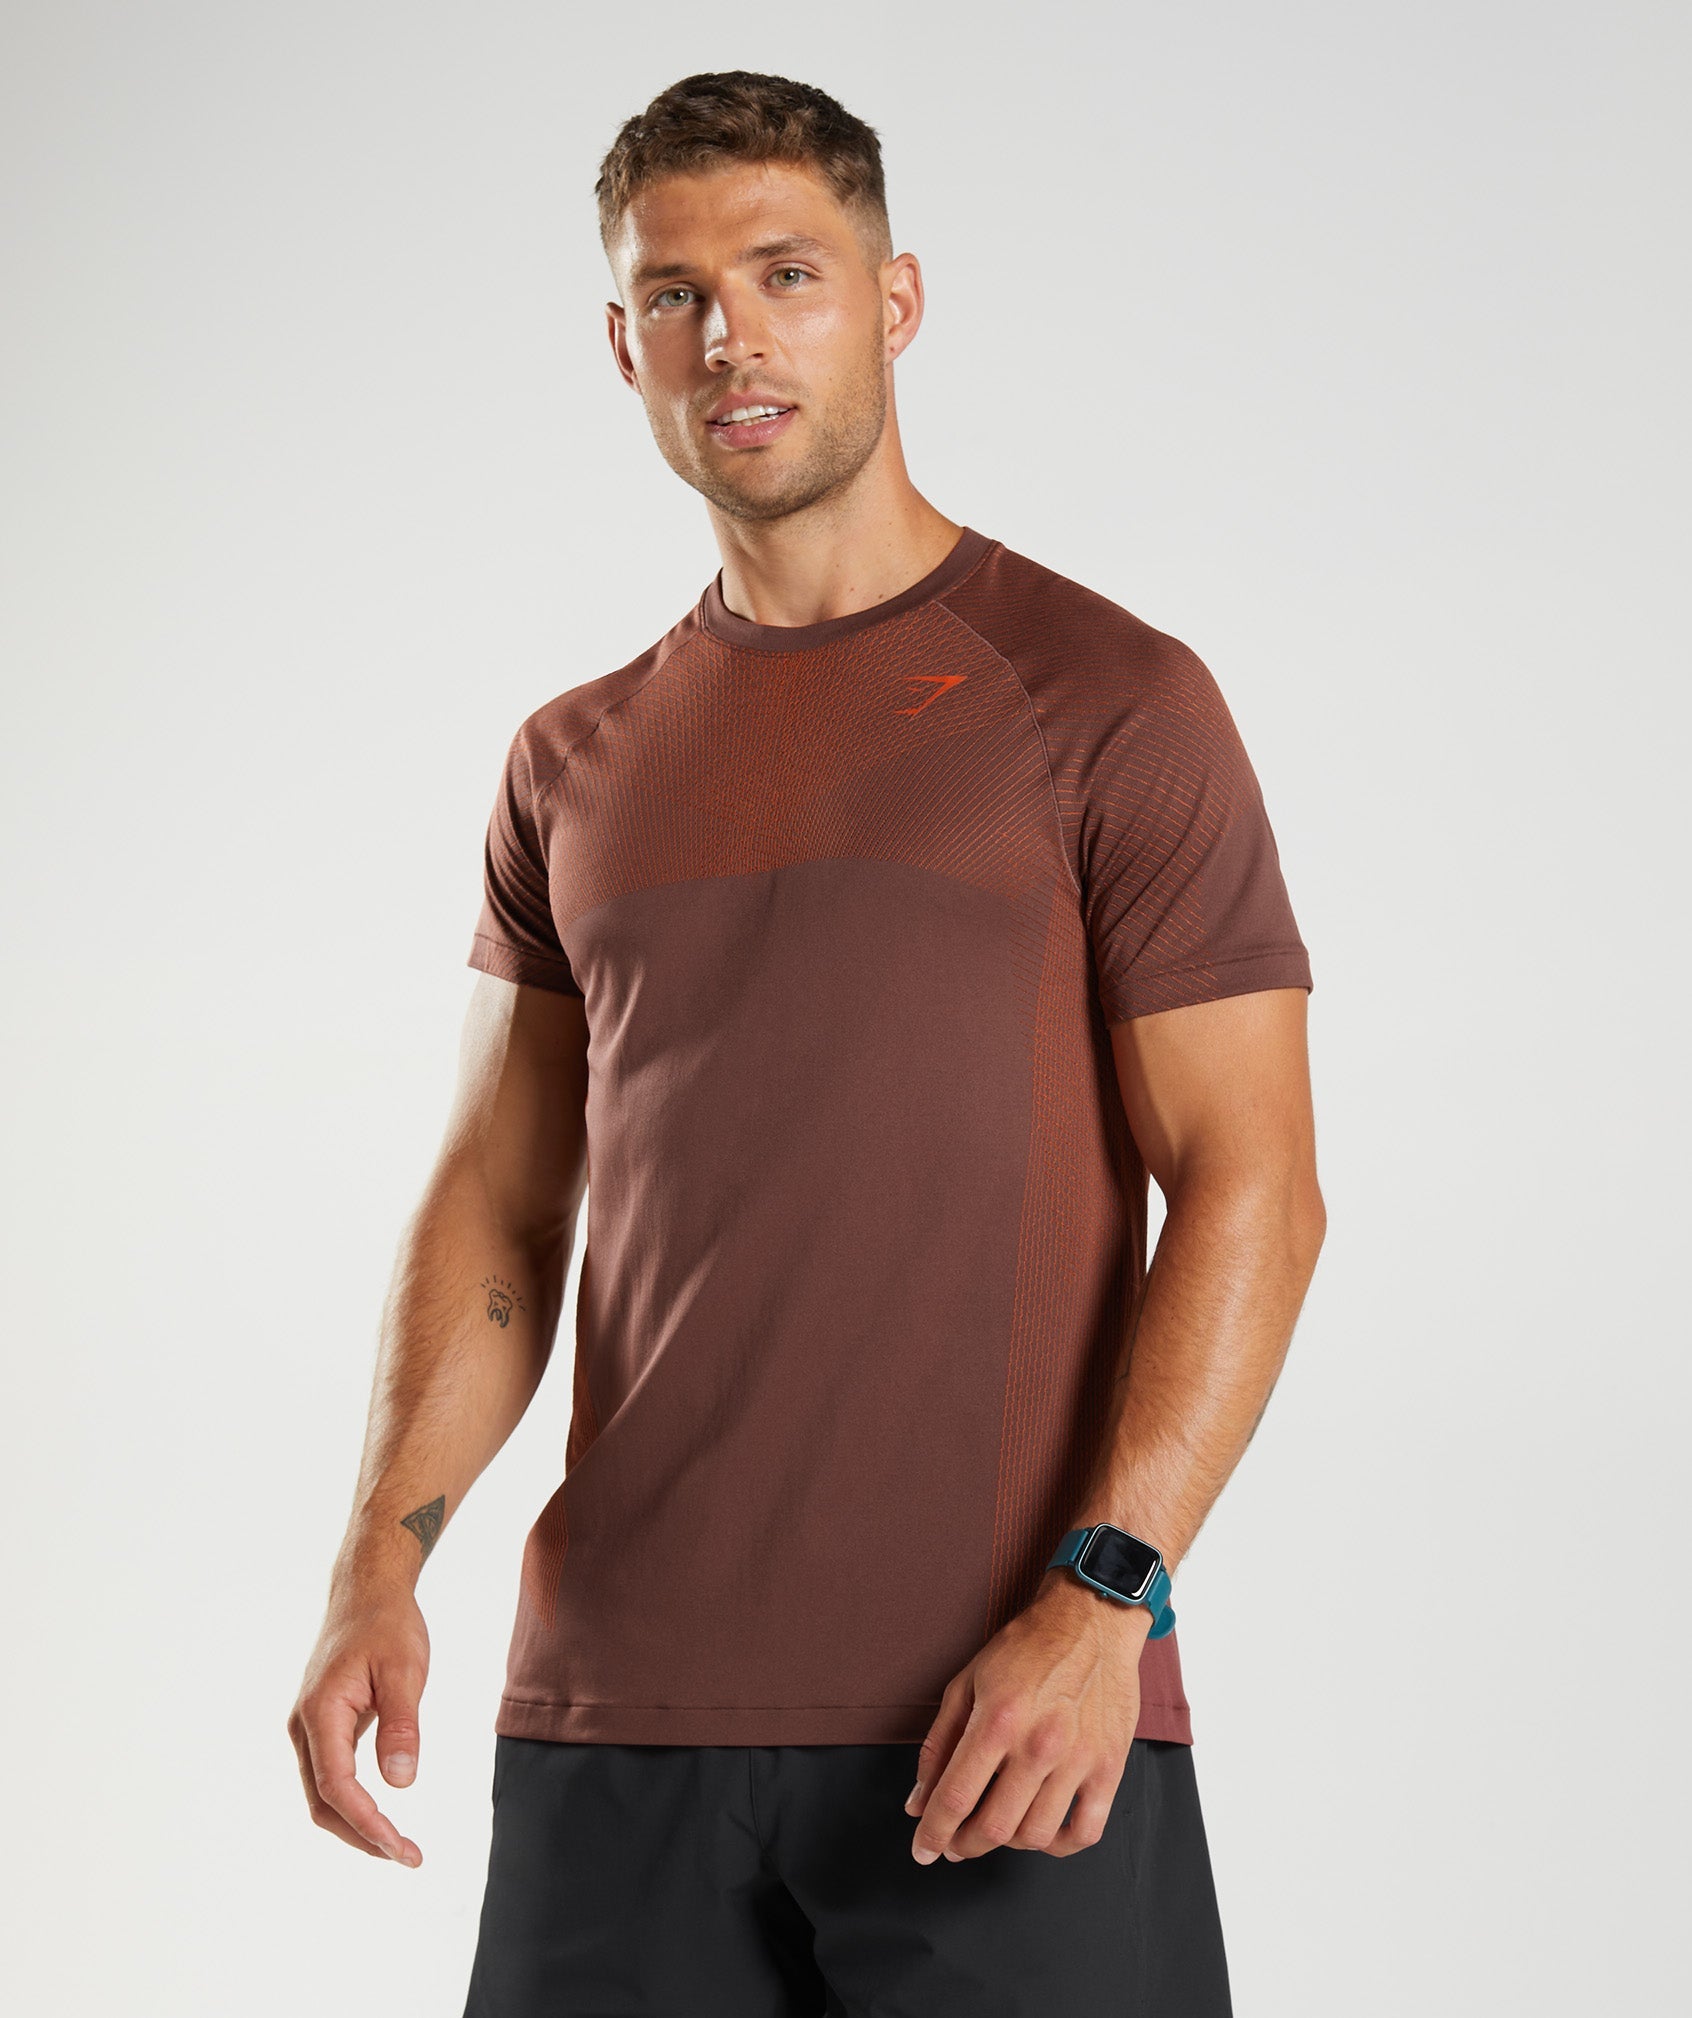 Apex Seamless T-Shirt in Cherry Brown/Pepper Red - view 1